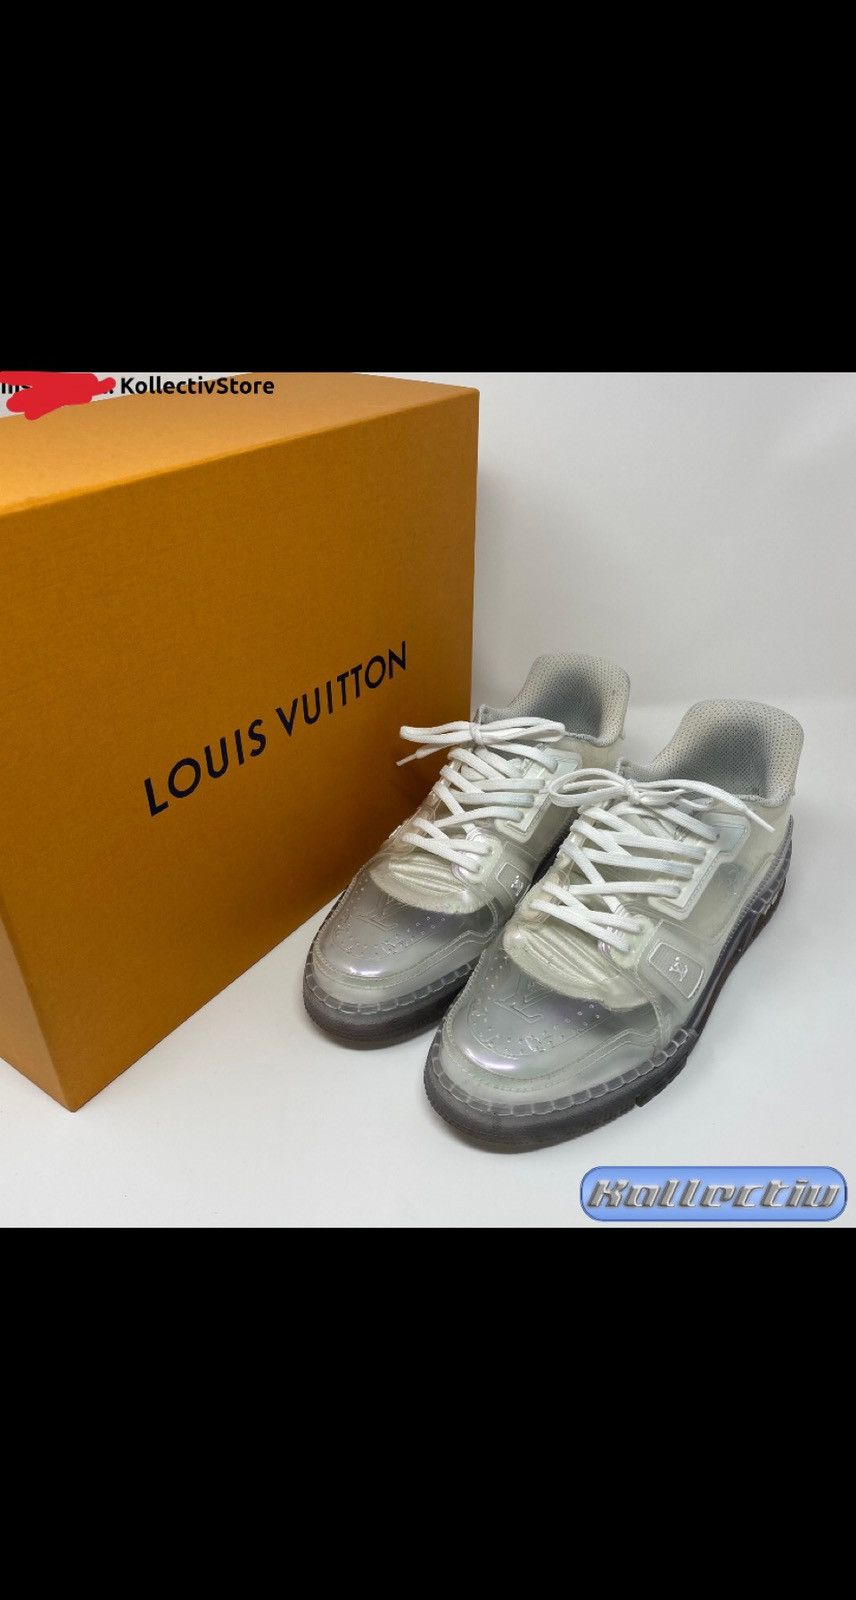 Louis Vuitton Transparent Sneakers TOP QUALITY 1:1 DETAILES, FROM SUPLOOK,  wholesale and retail, worldwide shipping. Pls Contact Whatsapp at  +8618559333945 to make an order or check details : r/CiciKicks